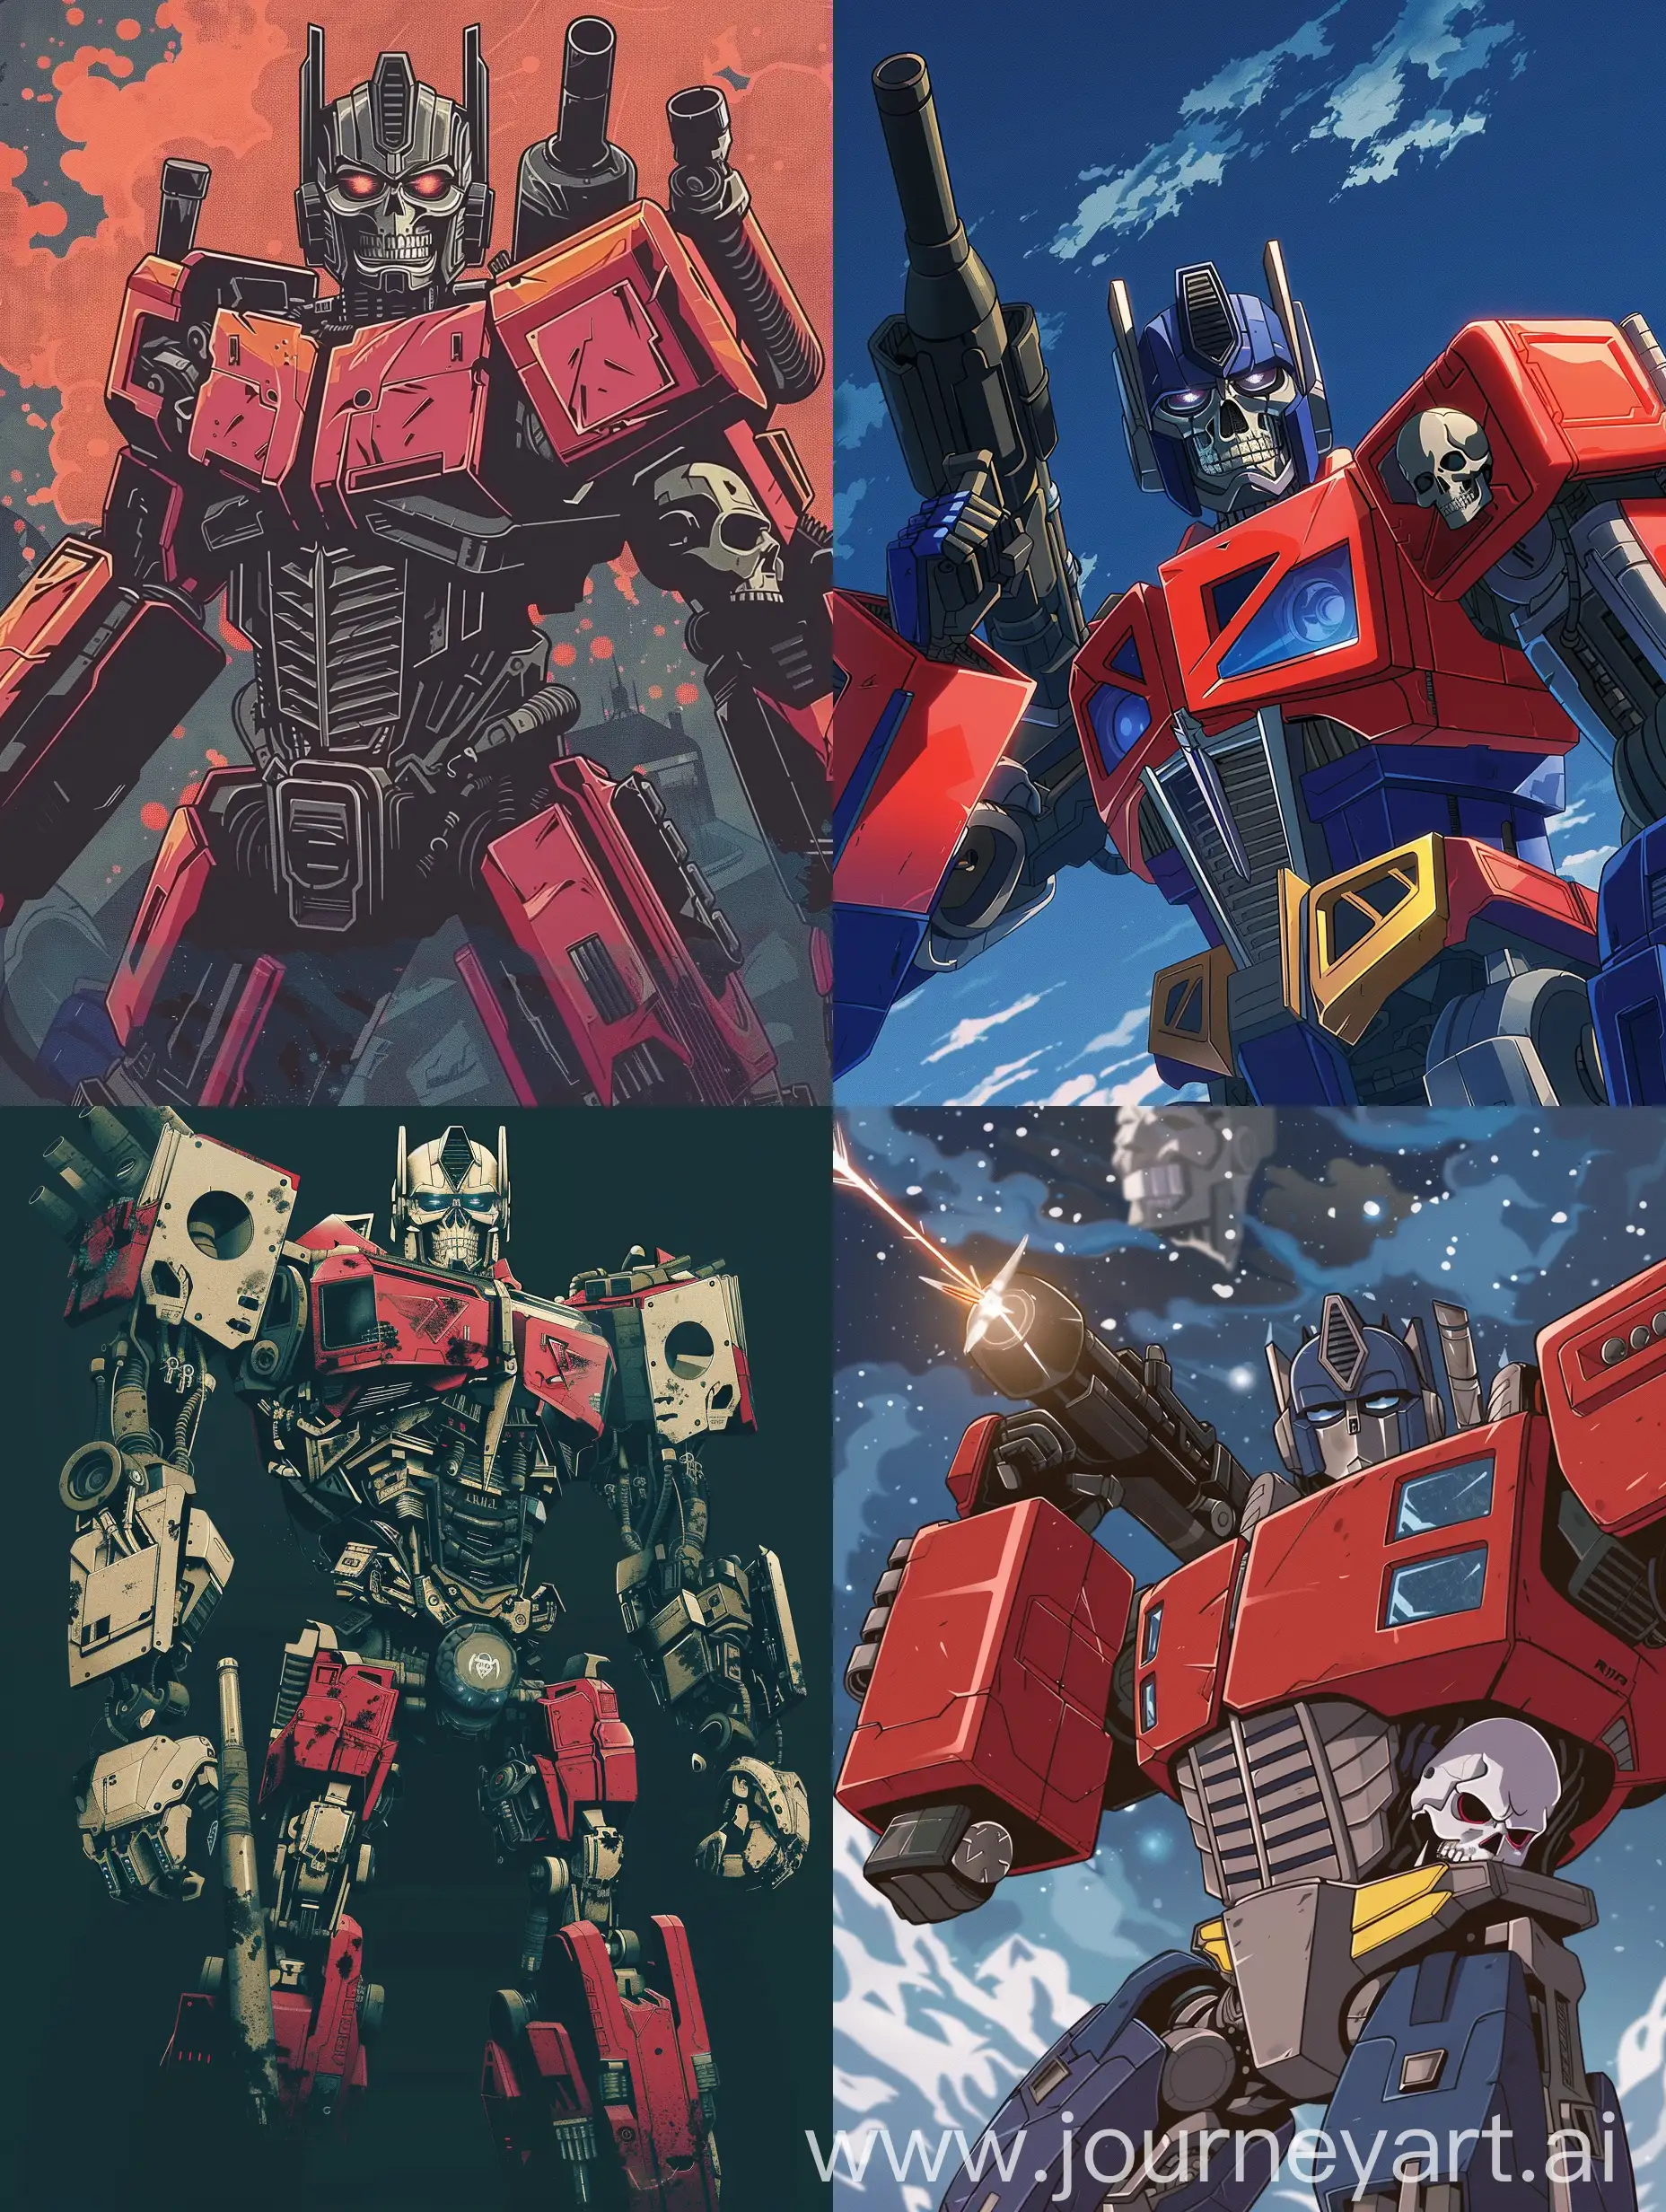 Optimus prime, with human skull, giant arm cannon, anime style 